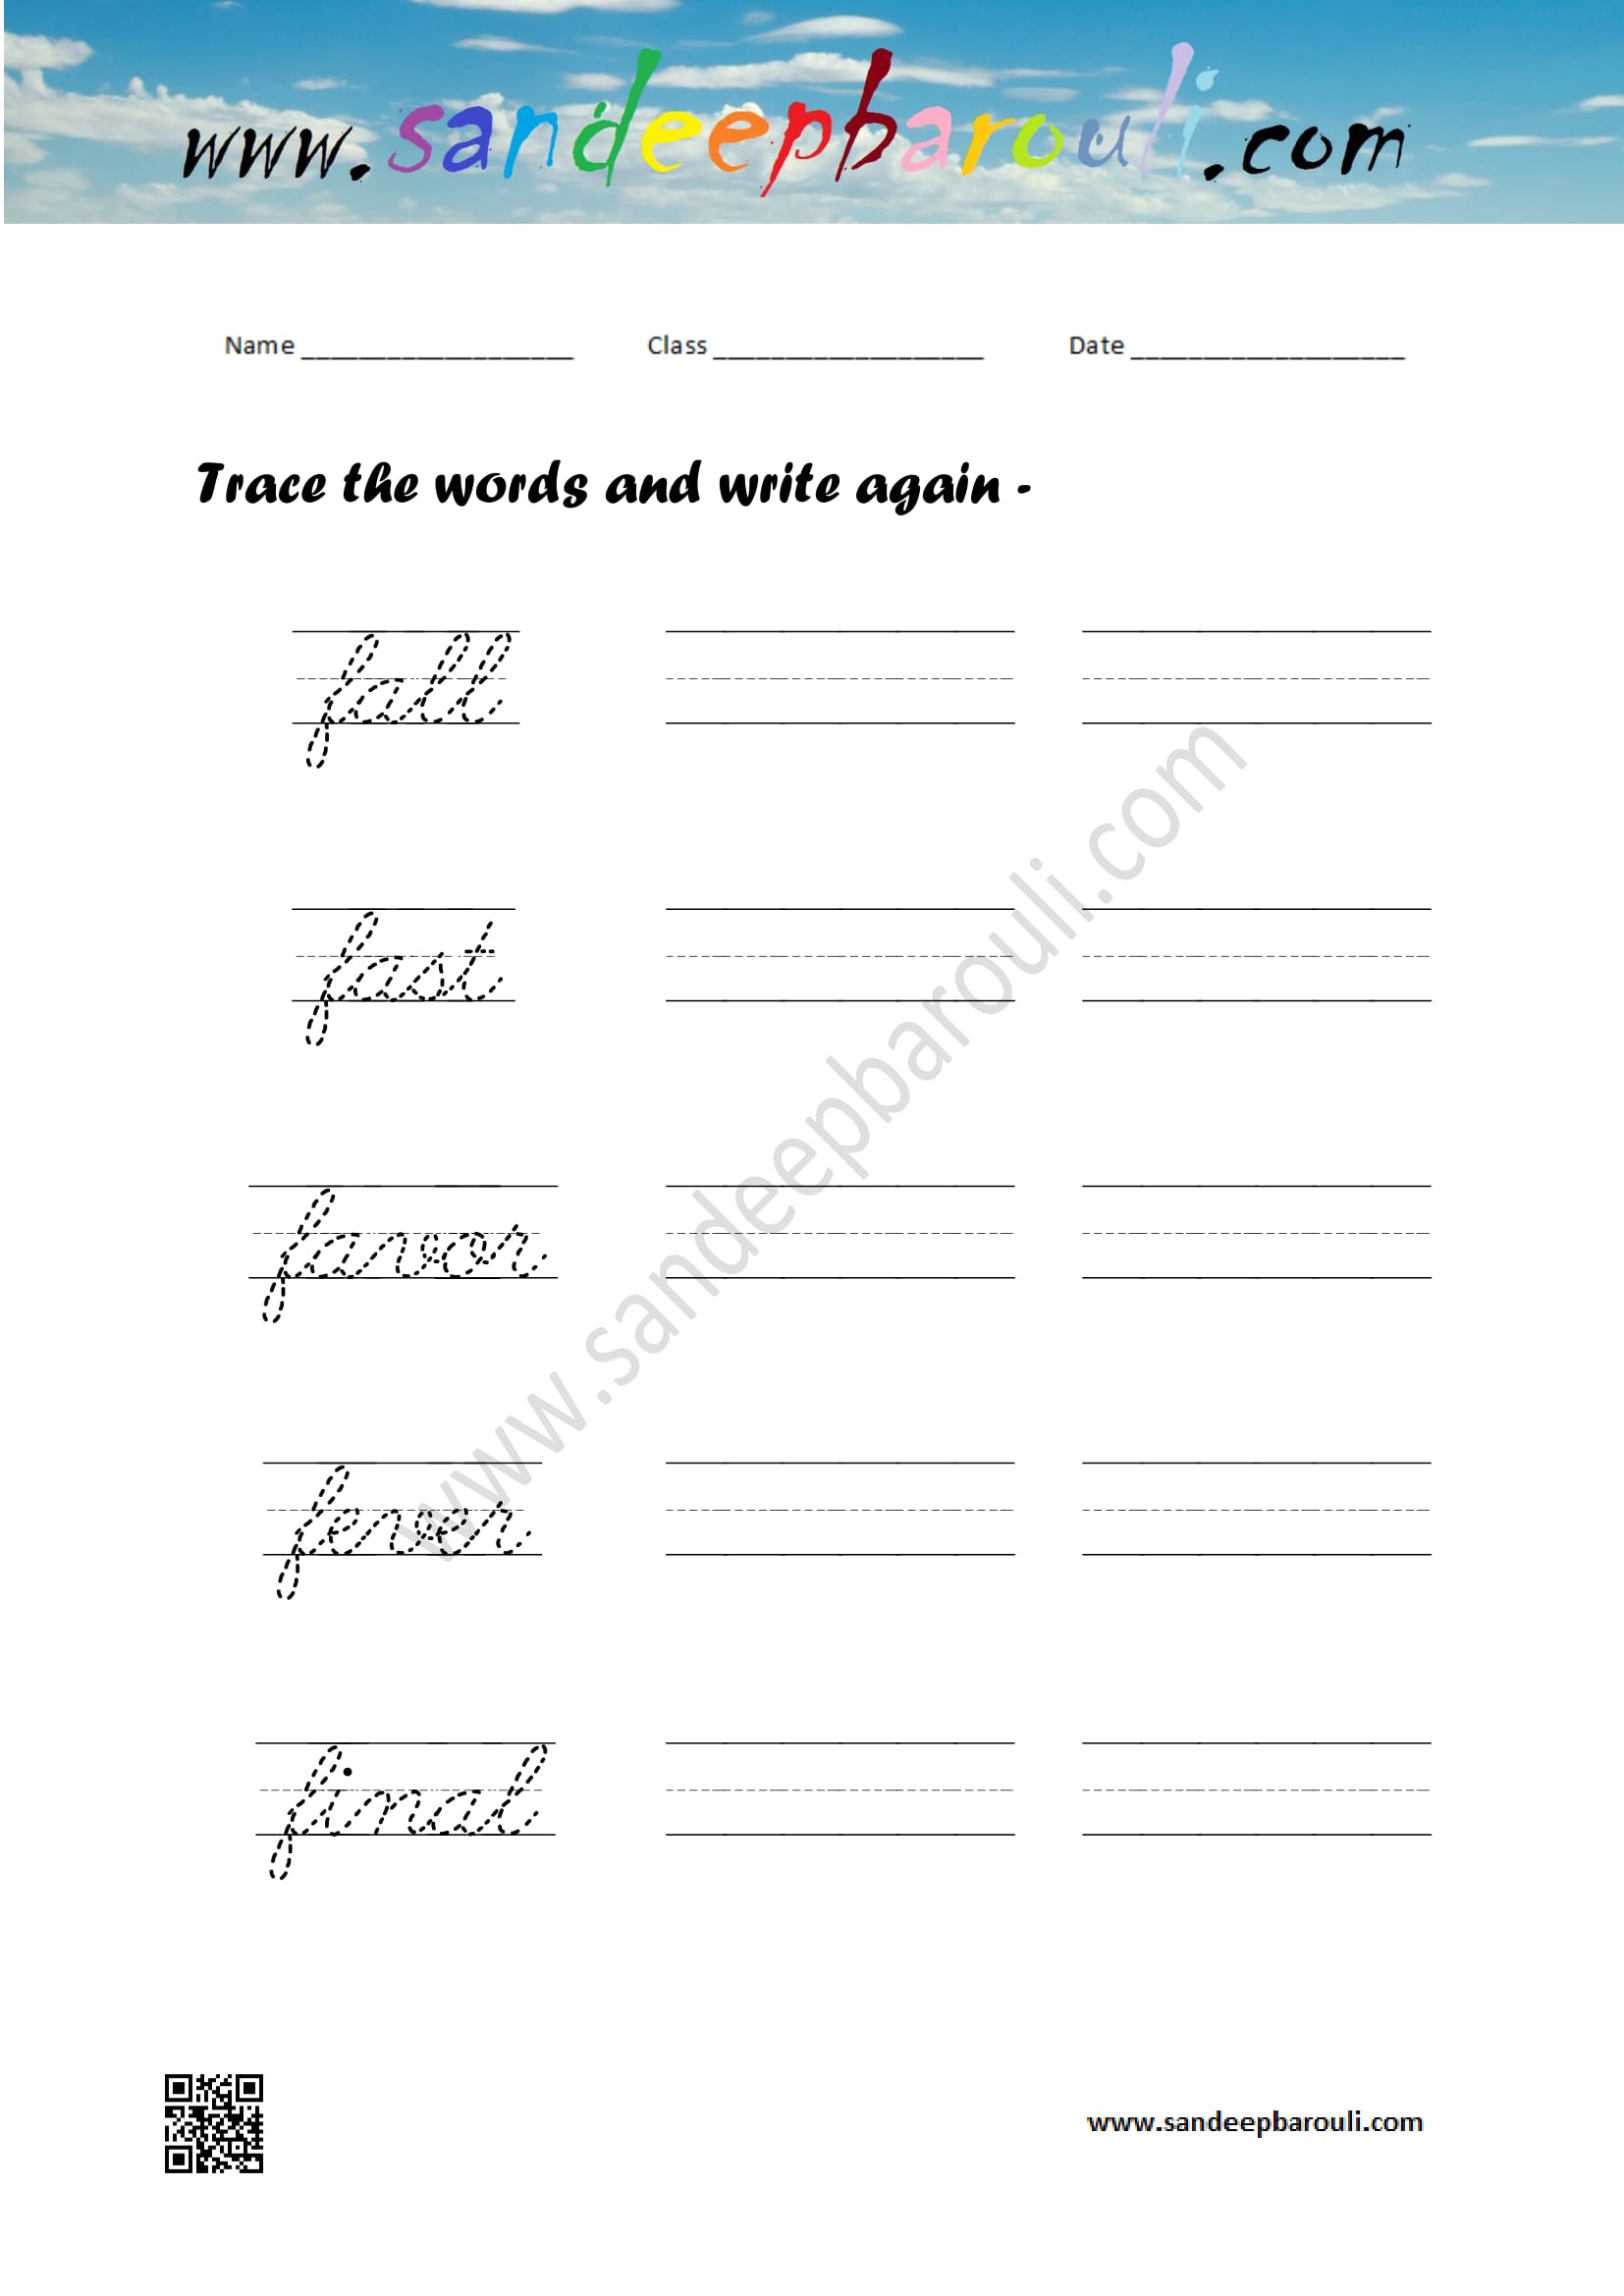 Cursive writing worksheet – trace the words and write again (43)